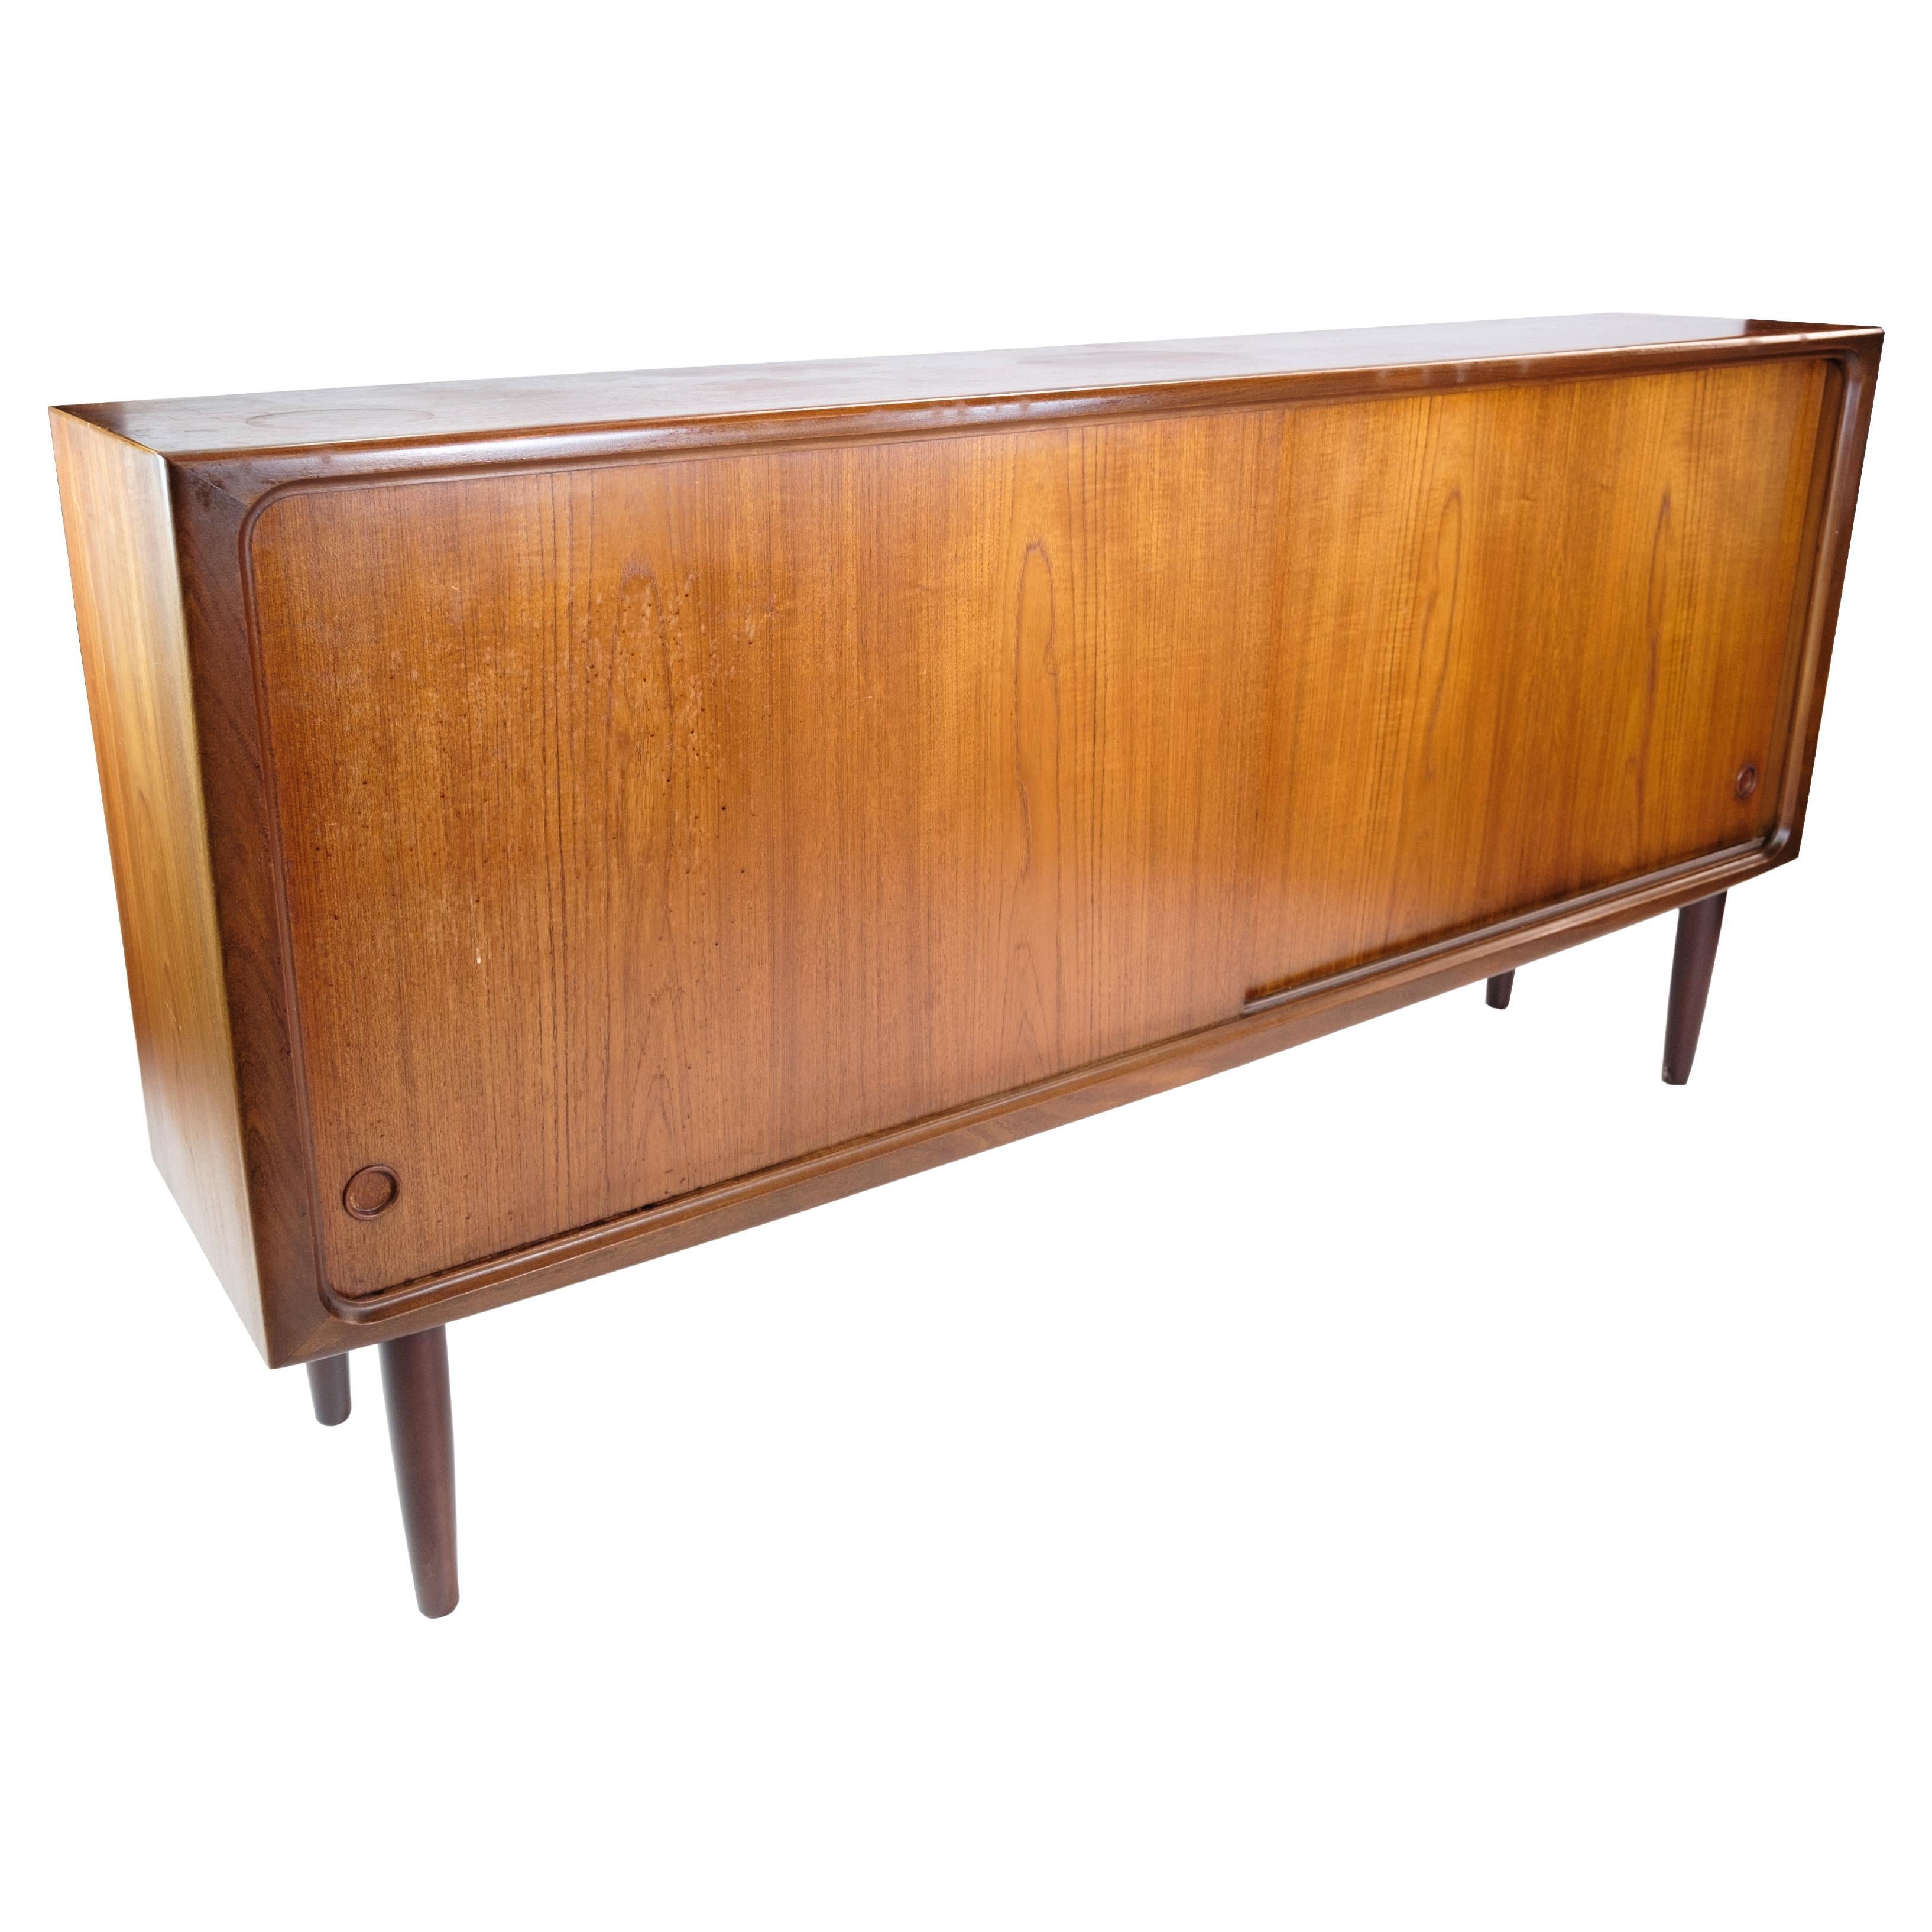 Discover the timeless charm and functionality with this small sideboard in teak wood, which is an iconic example of Danish design from around the 1960s. With its elegant appearance and smart storage solutions, this sideboard is the perfect addition